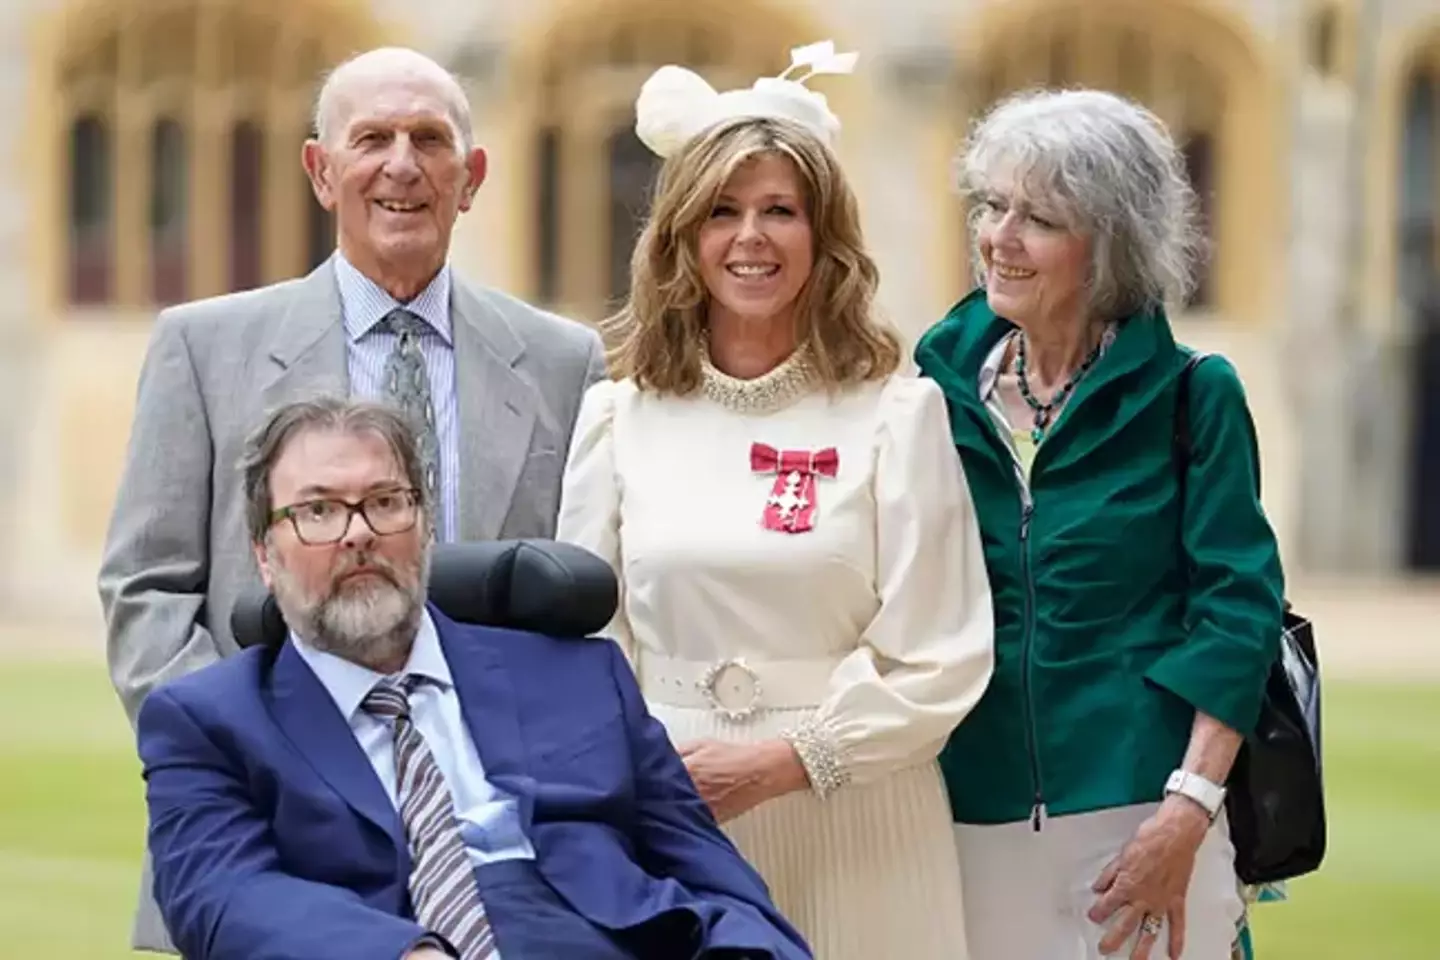 Derek was able to be with his wife as she received her MBE earlier this year.